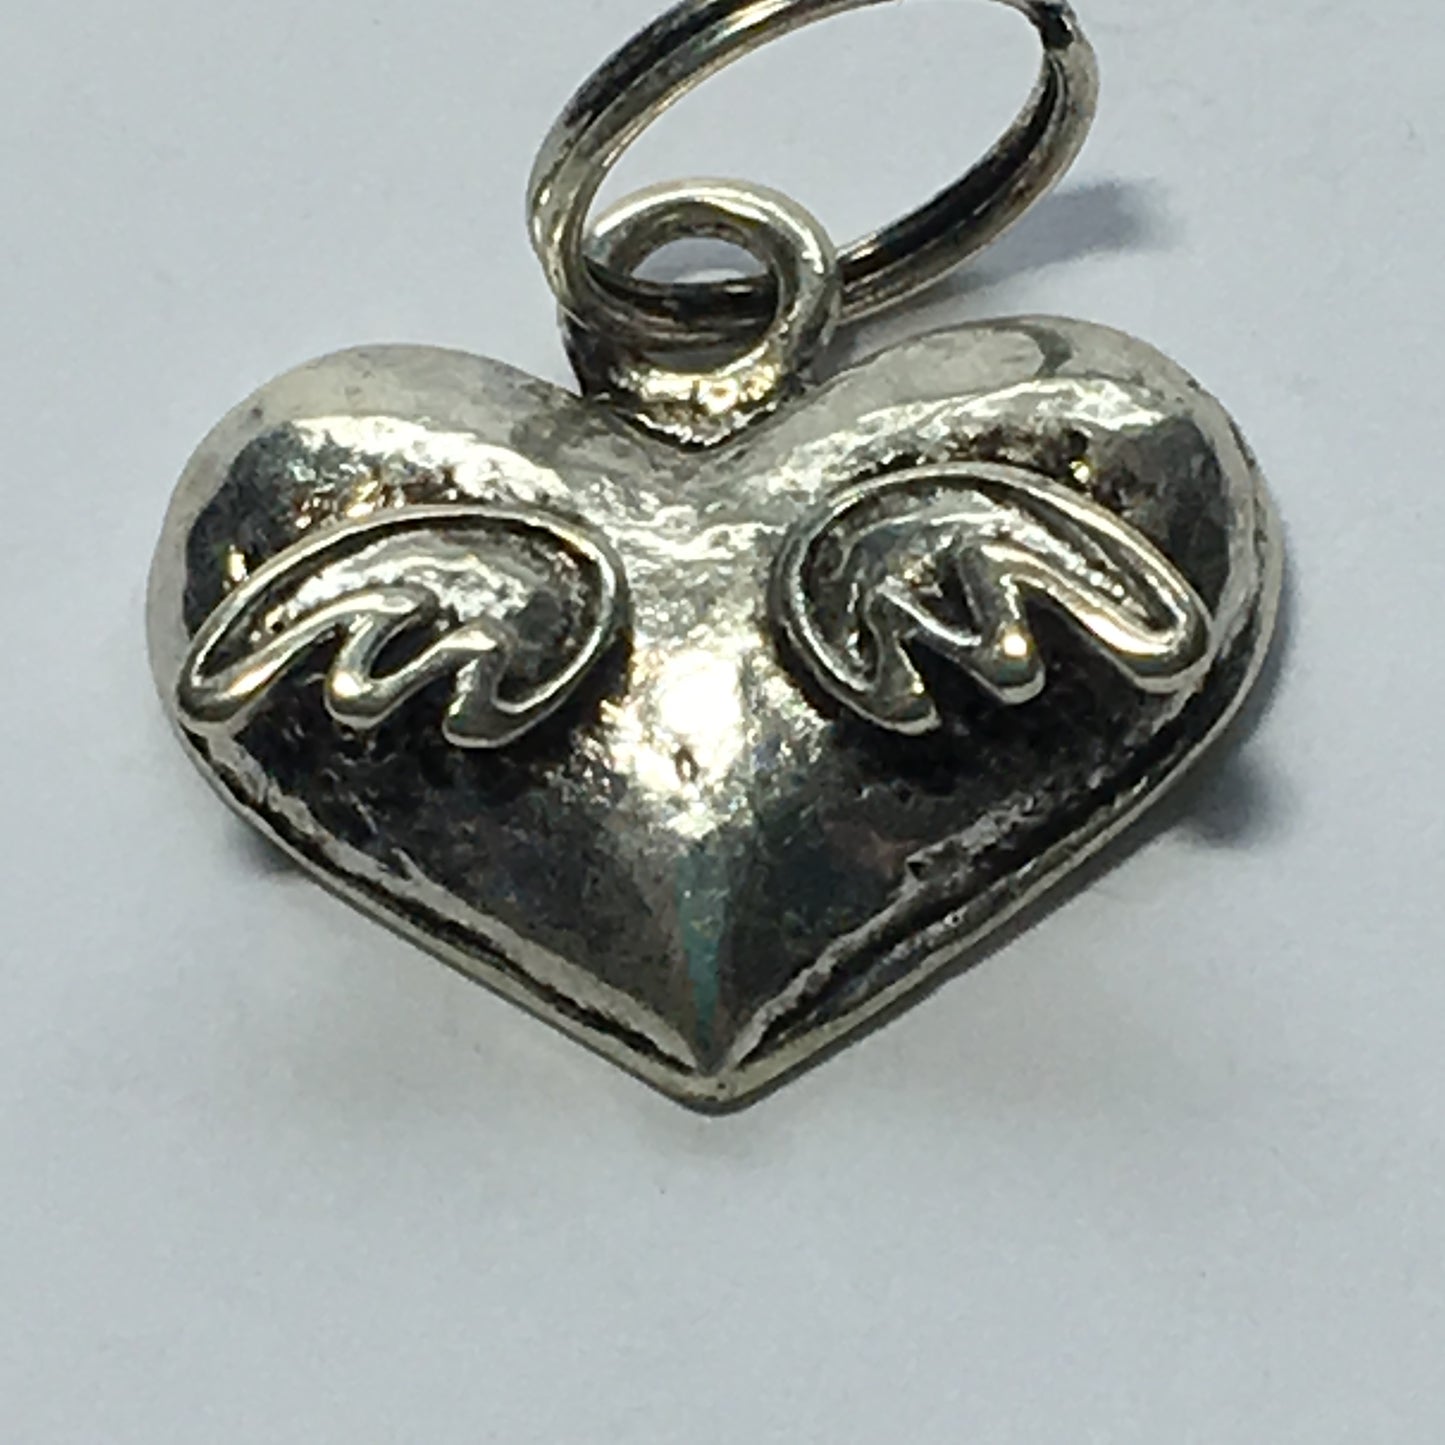 Antique Silver Heart with Wings Charm, 18 x 15 mm